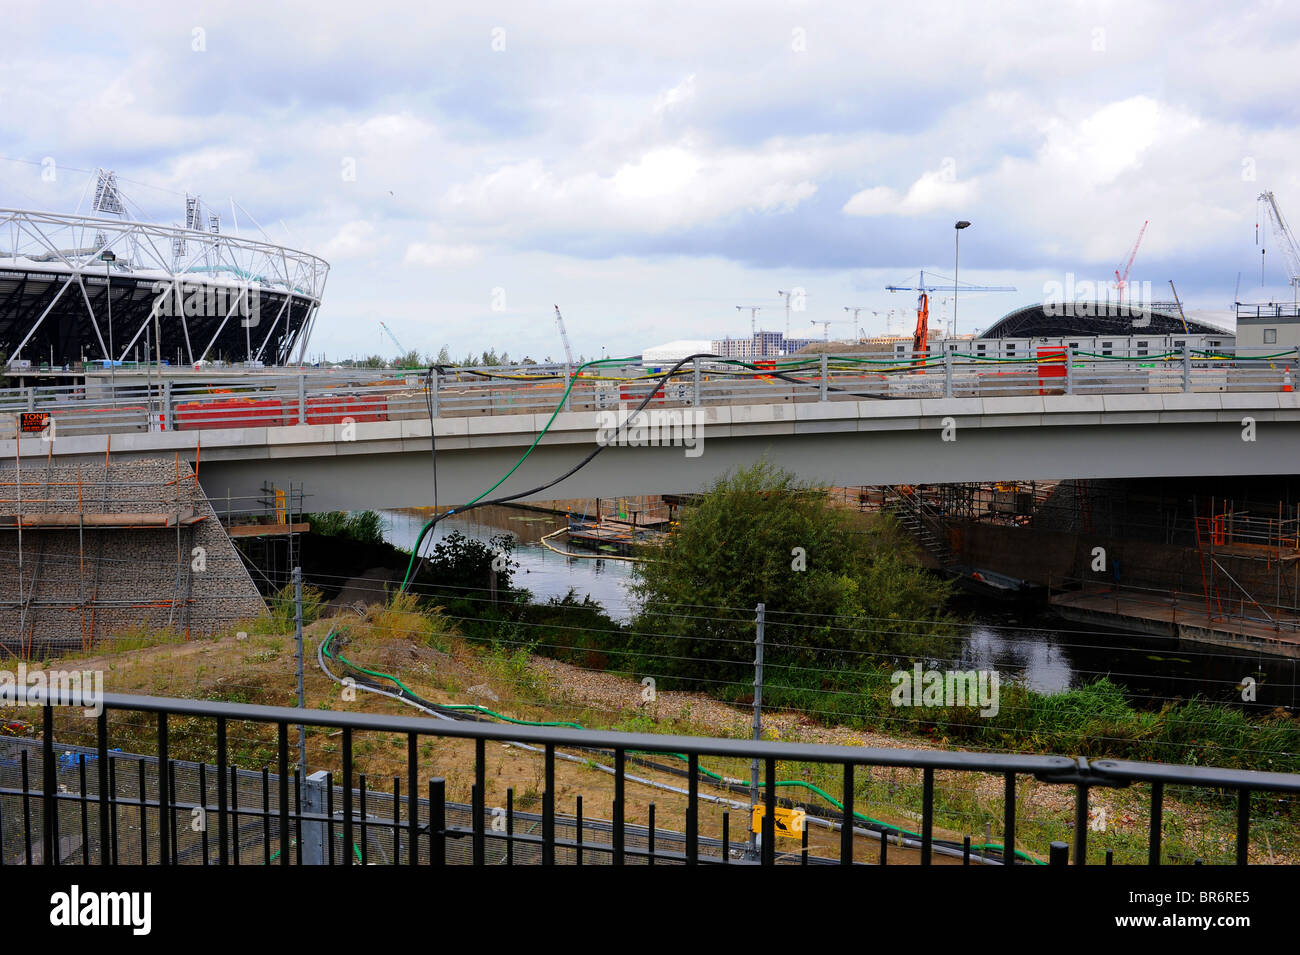 The River Lee flowing under the bridge at the 2012 Summer Olympics Venue - London Stock Photo